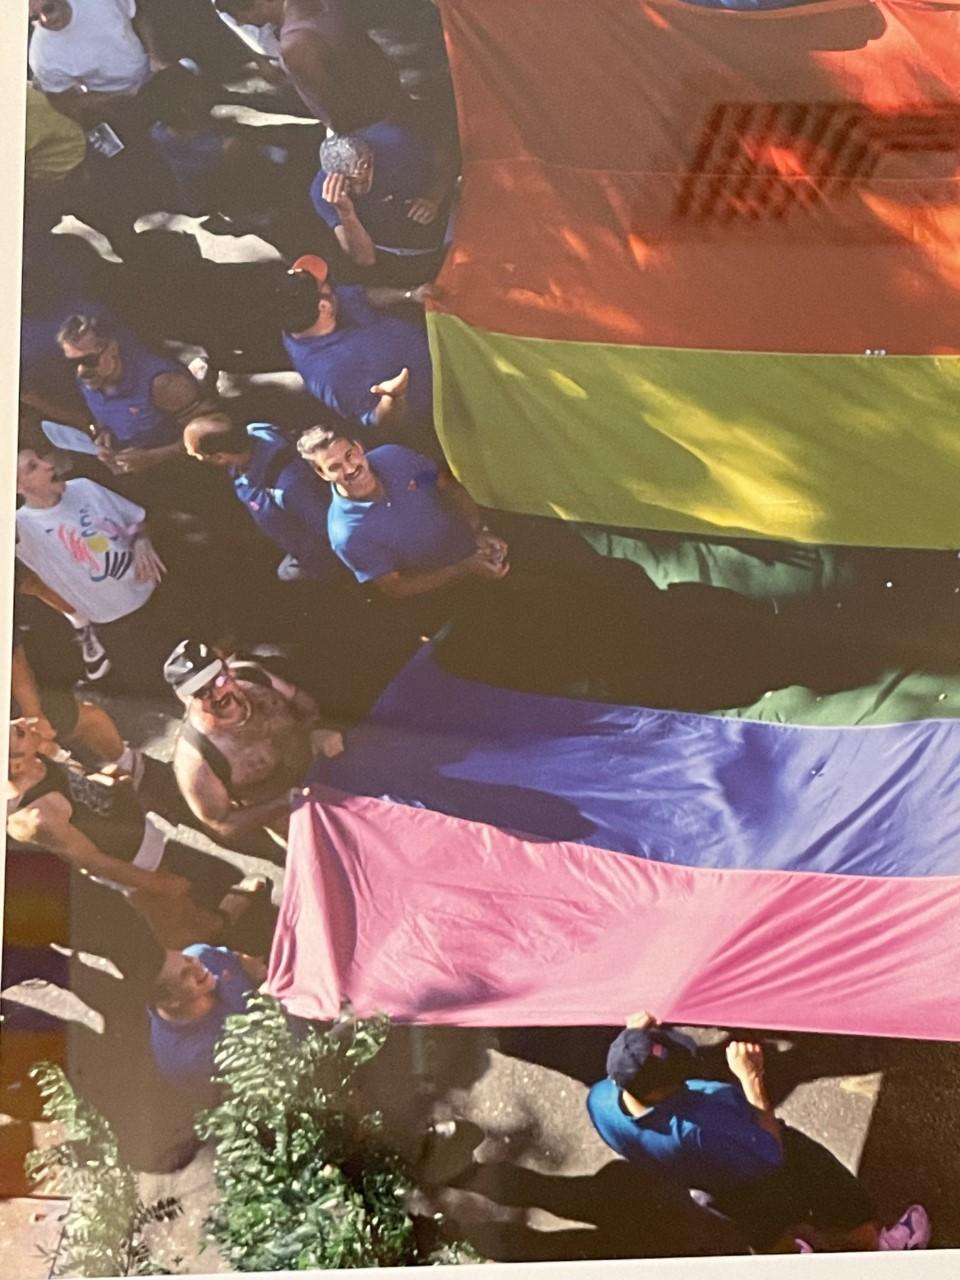 Photographer Suzanne Poli is internationaly renowned for her historic Gay Pride and LGBT images in New York city .The Gay Pride Rainbow Flag,created by Gilbert Baker in 1978 in San Francisco,  is now recognized world wide and is traditionally